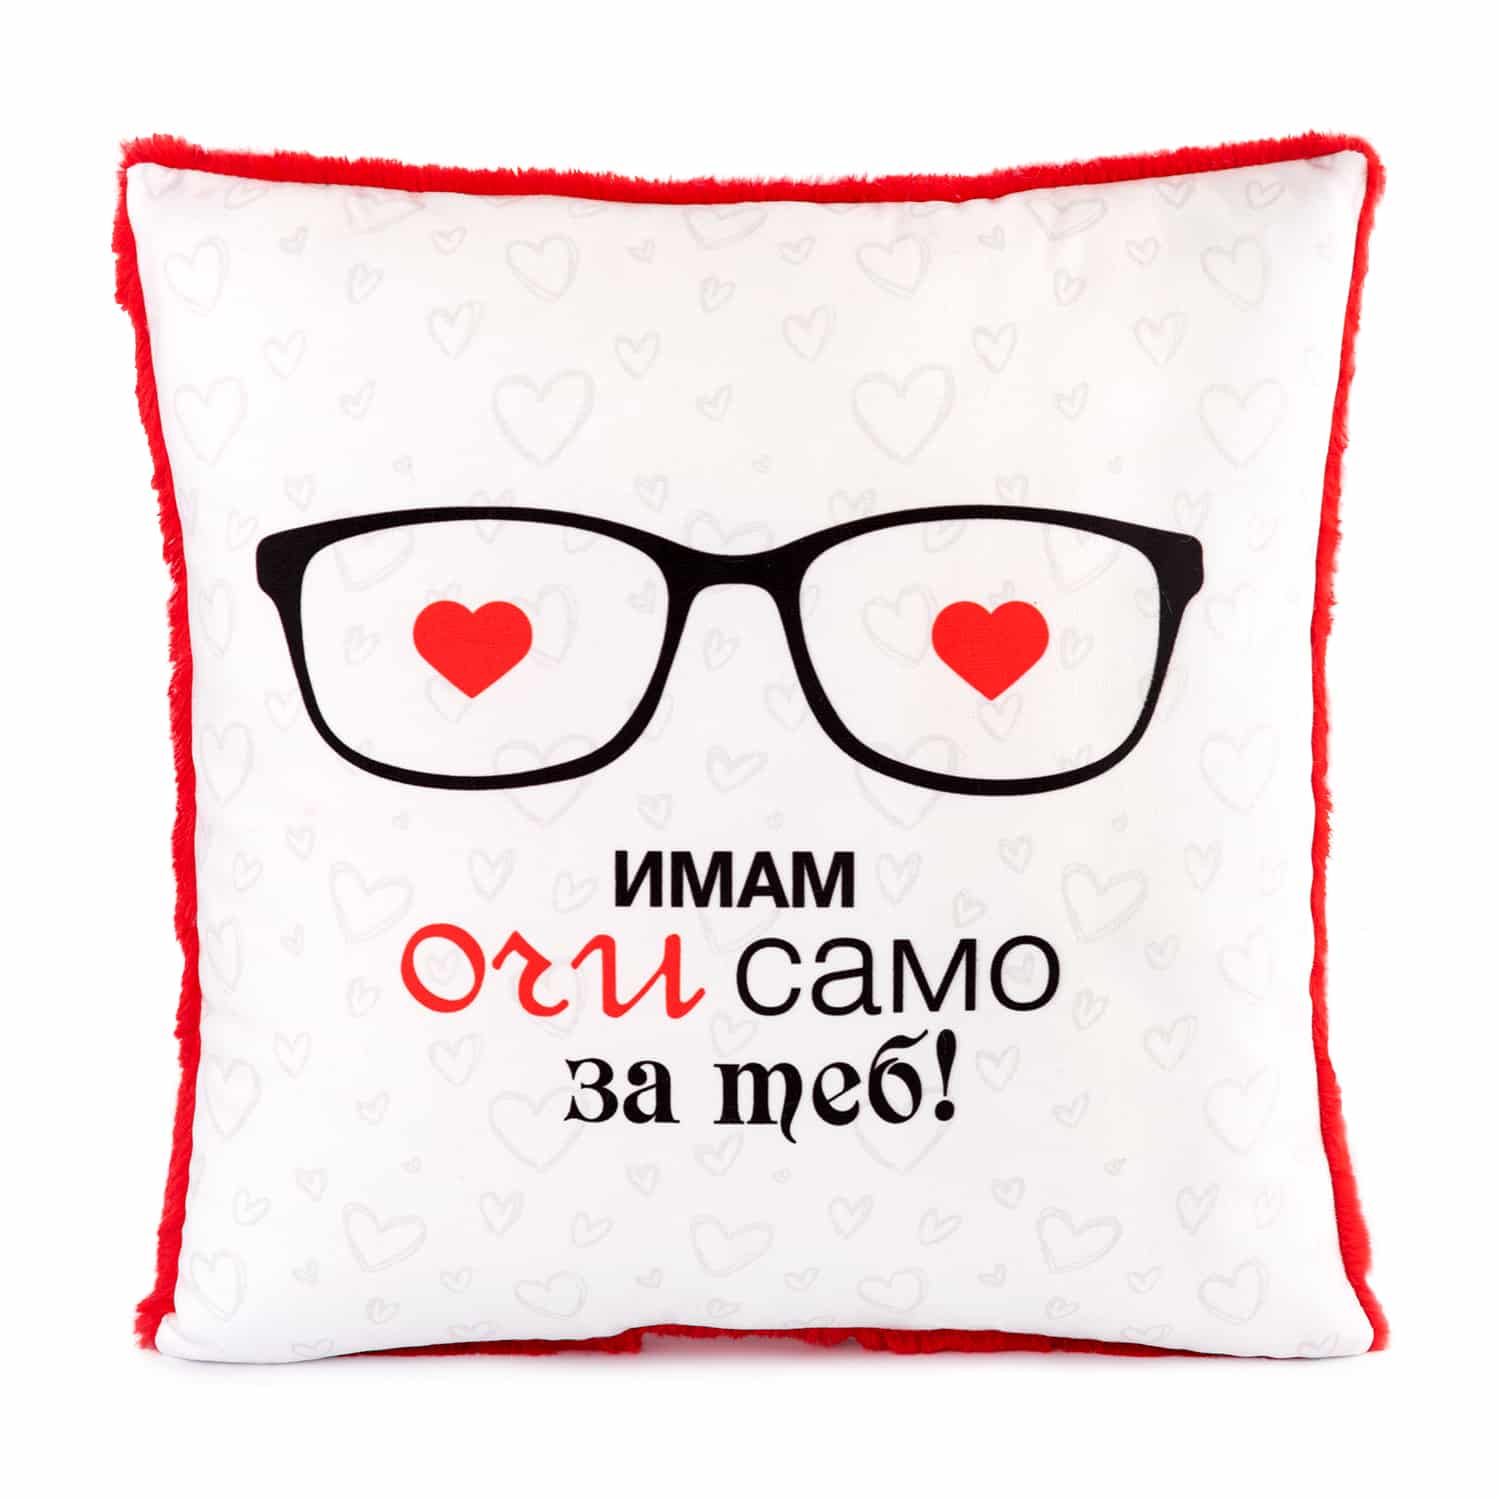 Pillow for Valentine's Day